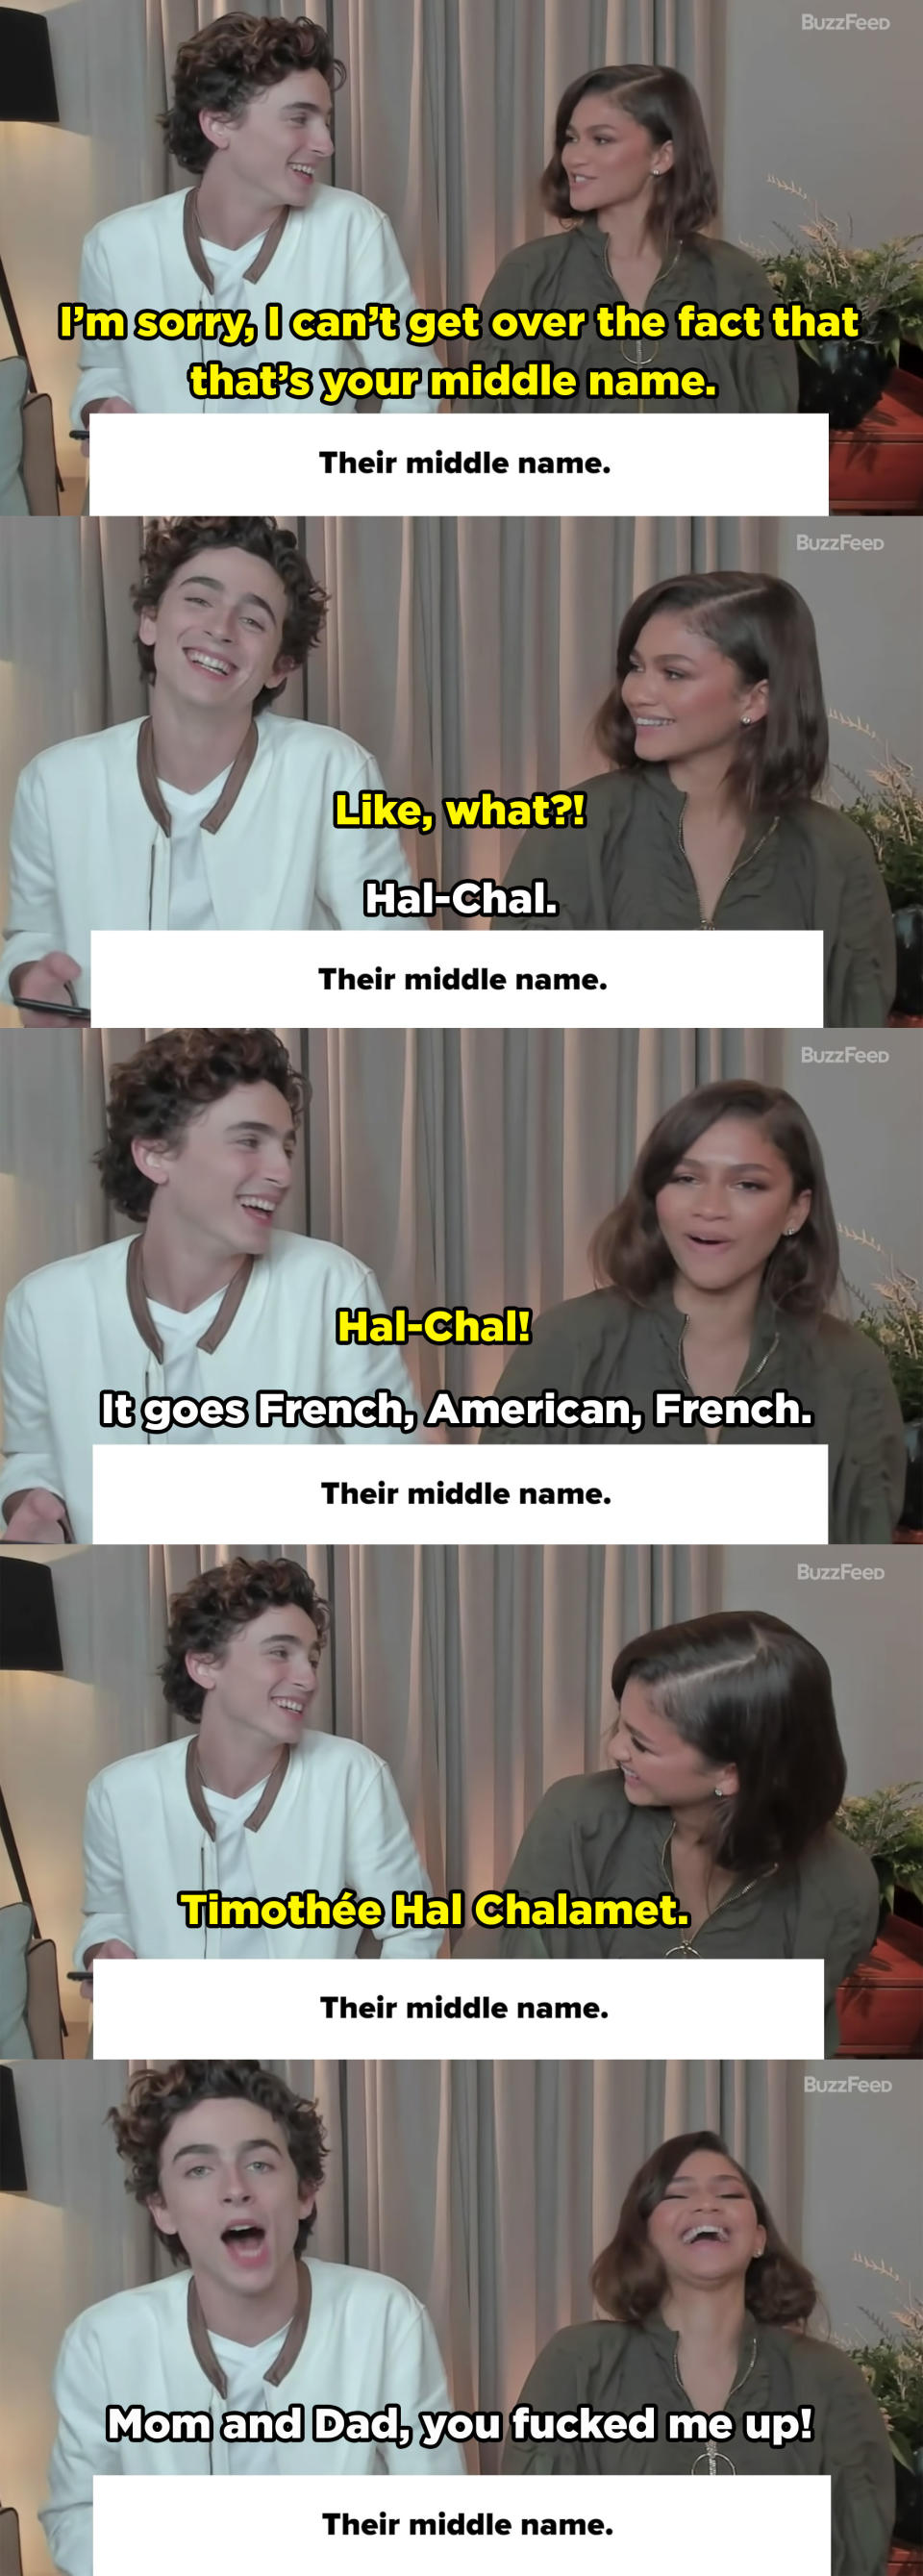 Zendaya says she can't get over Timmy's middle name being Hal. Then they joke about "Hal Chal" And Timmy explains his name goes French, American, French. He then jokes that his parents fucked him up.